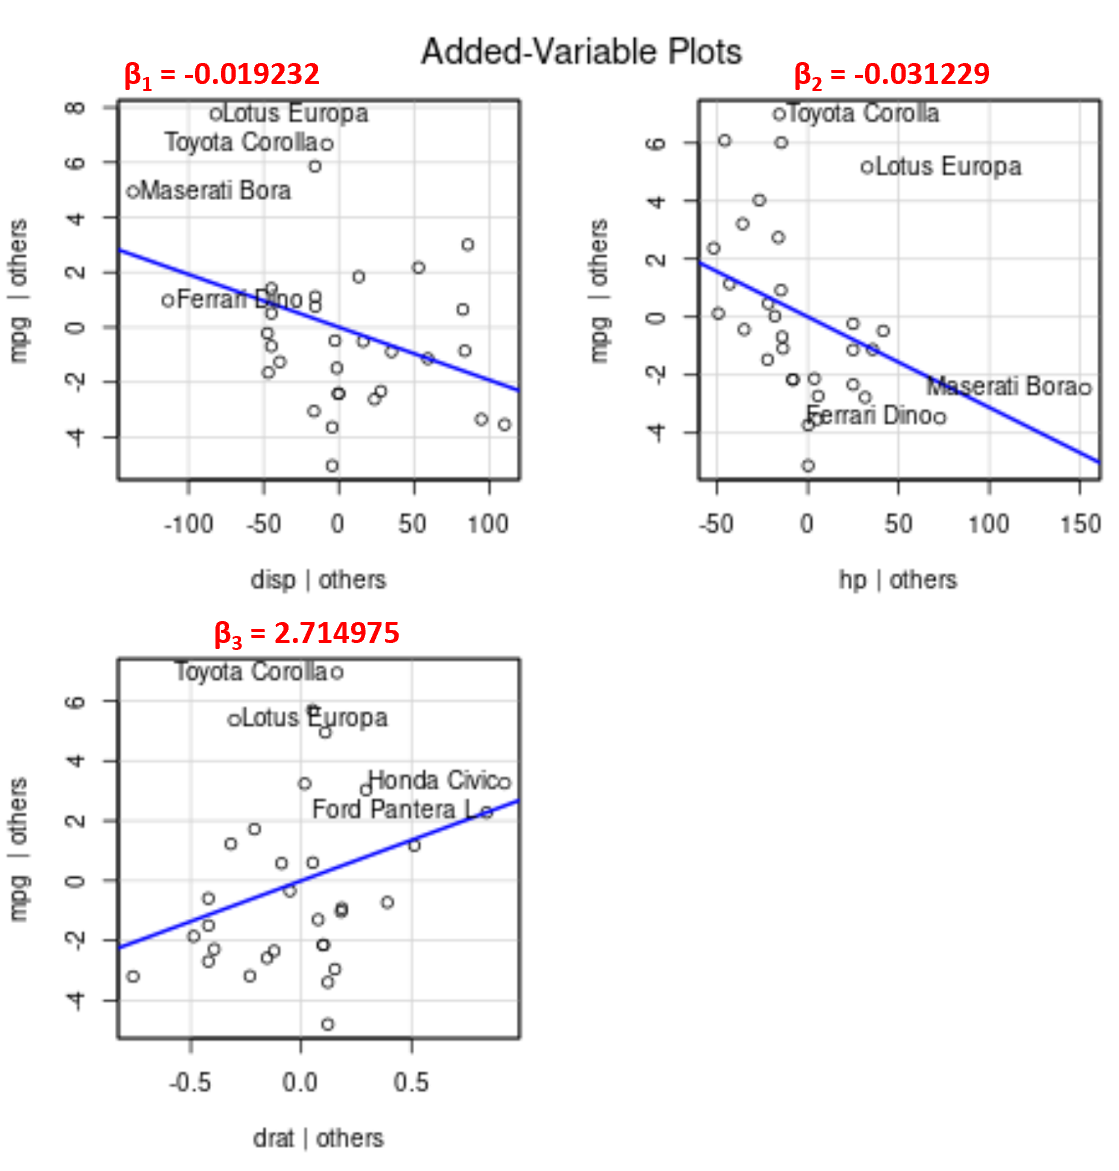 How to interpret added variable plots